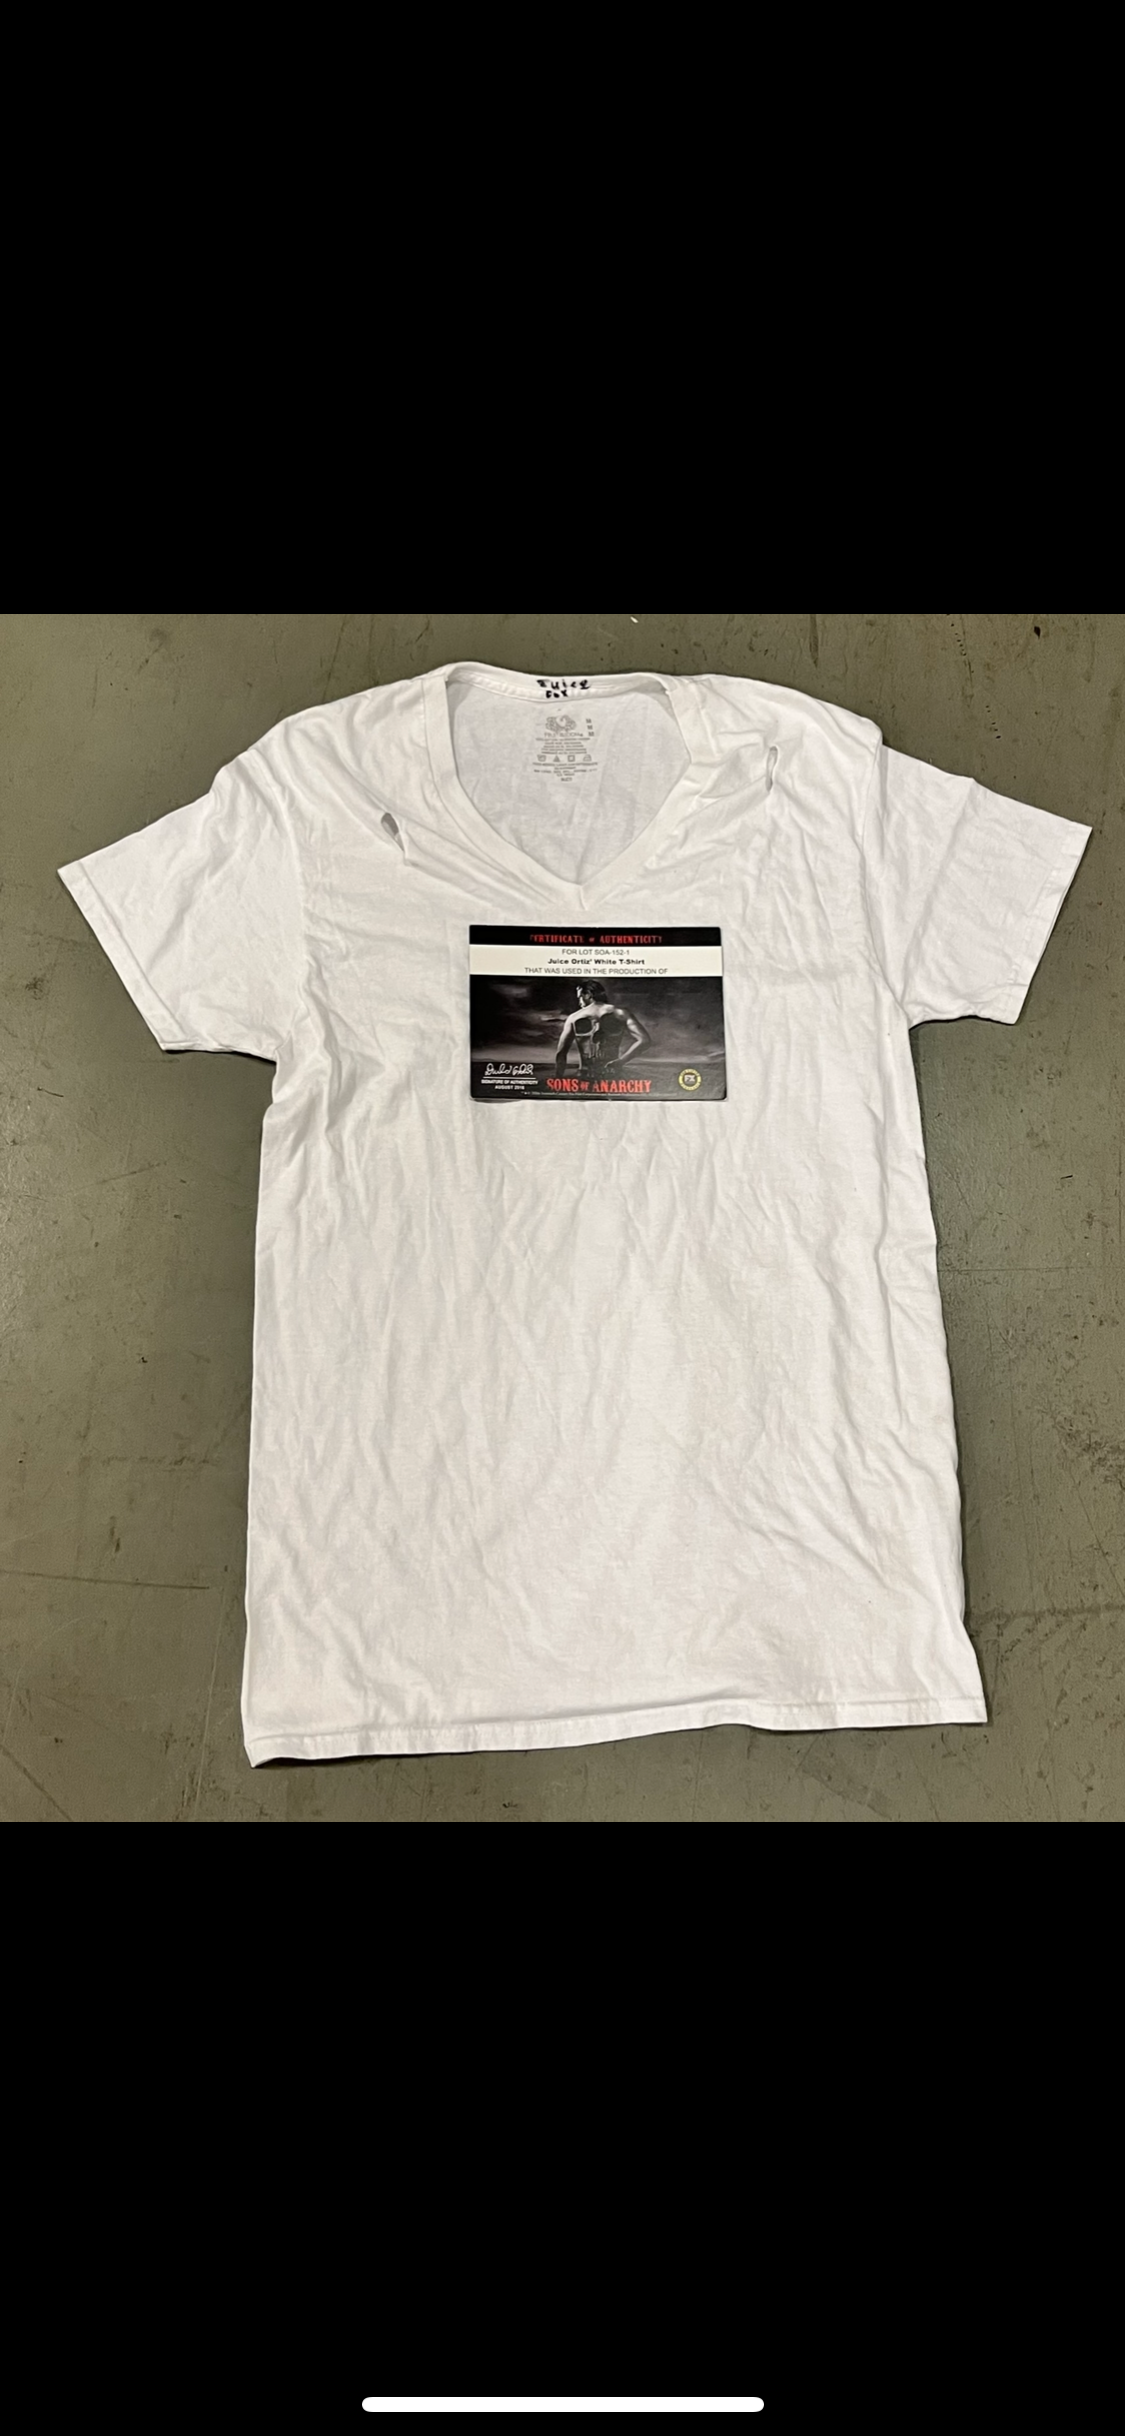 SONS OF ANARCHY: Juice’s White V-Neck T-Shirt